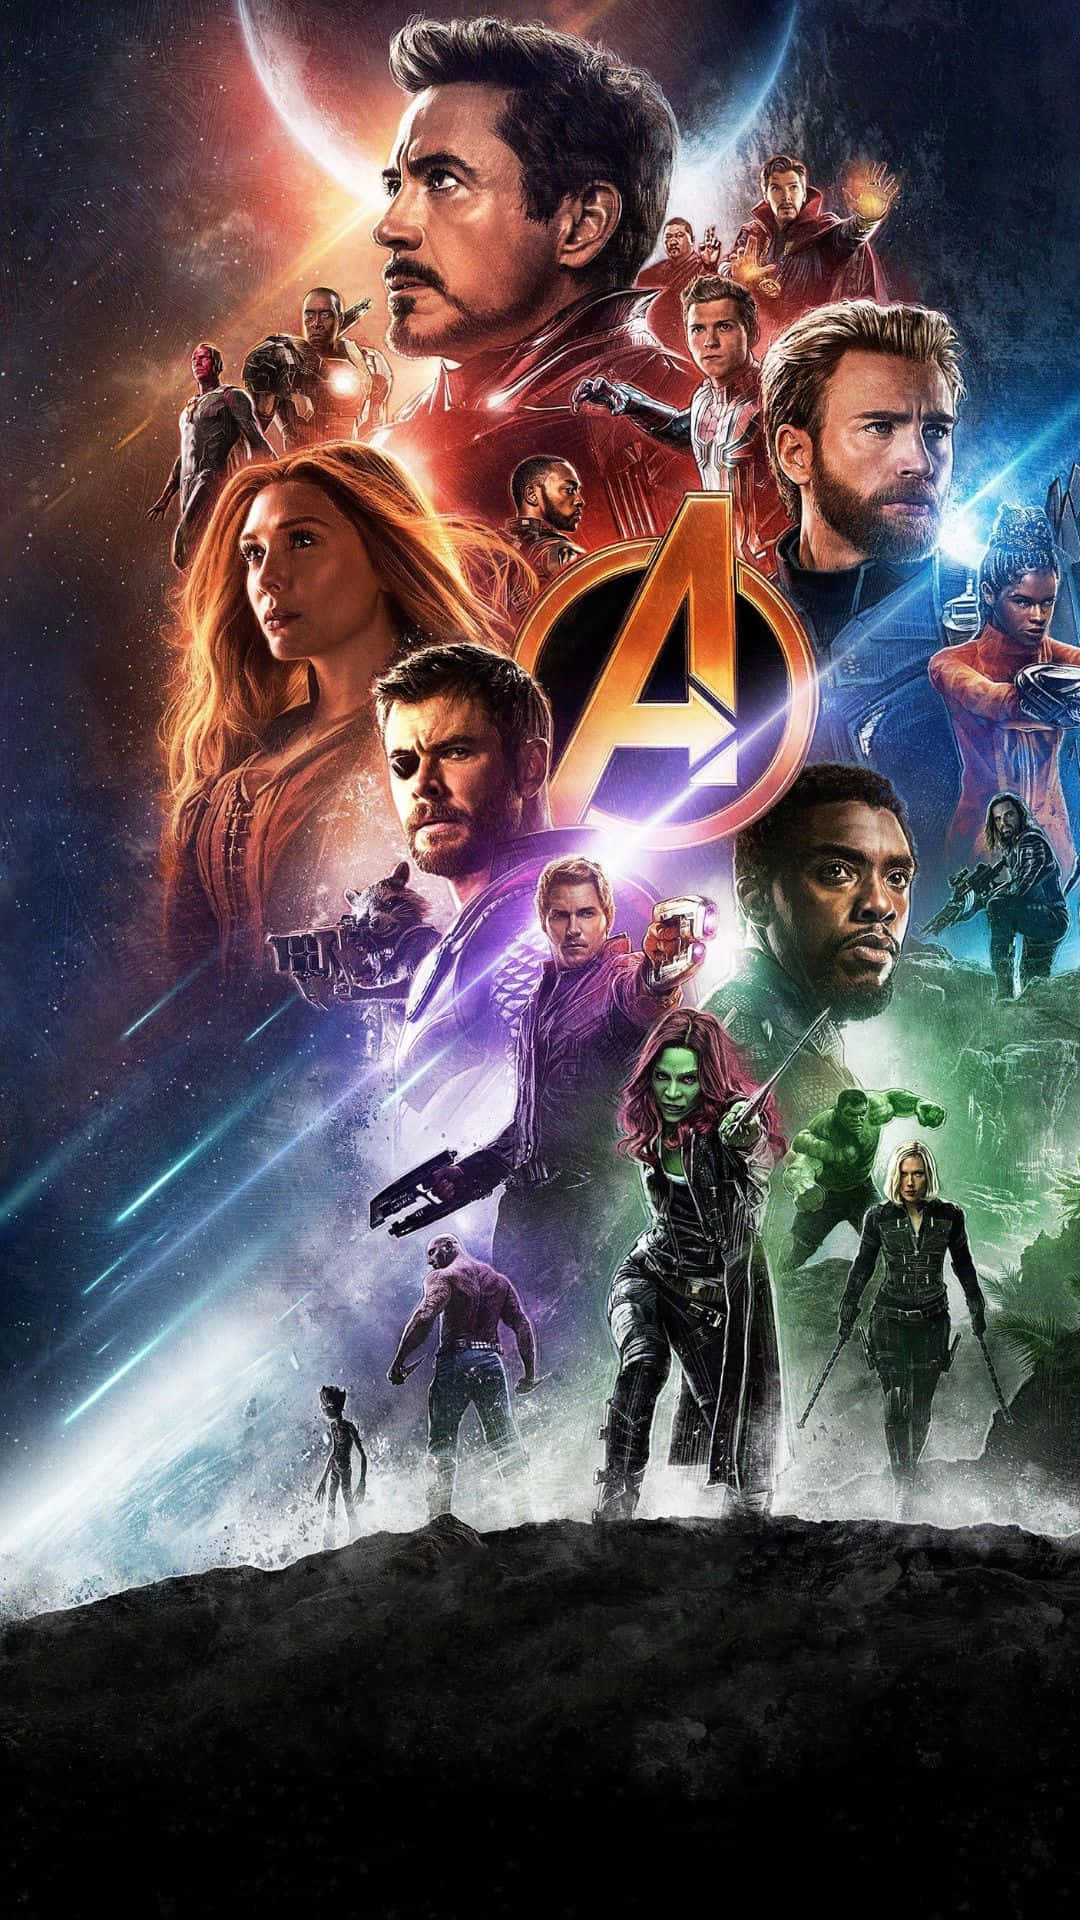 Get Ready for Avengers Endgame with the New iPhone Wallpaper